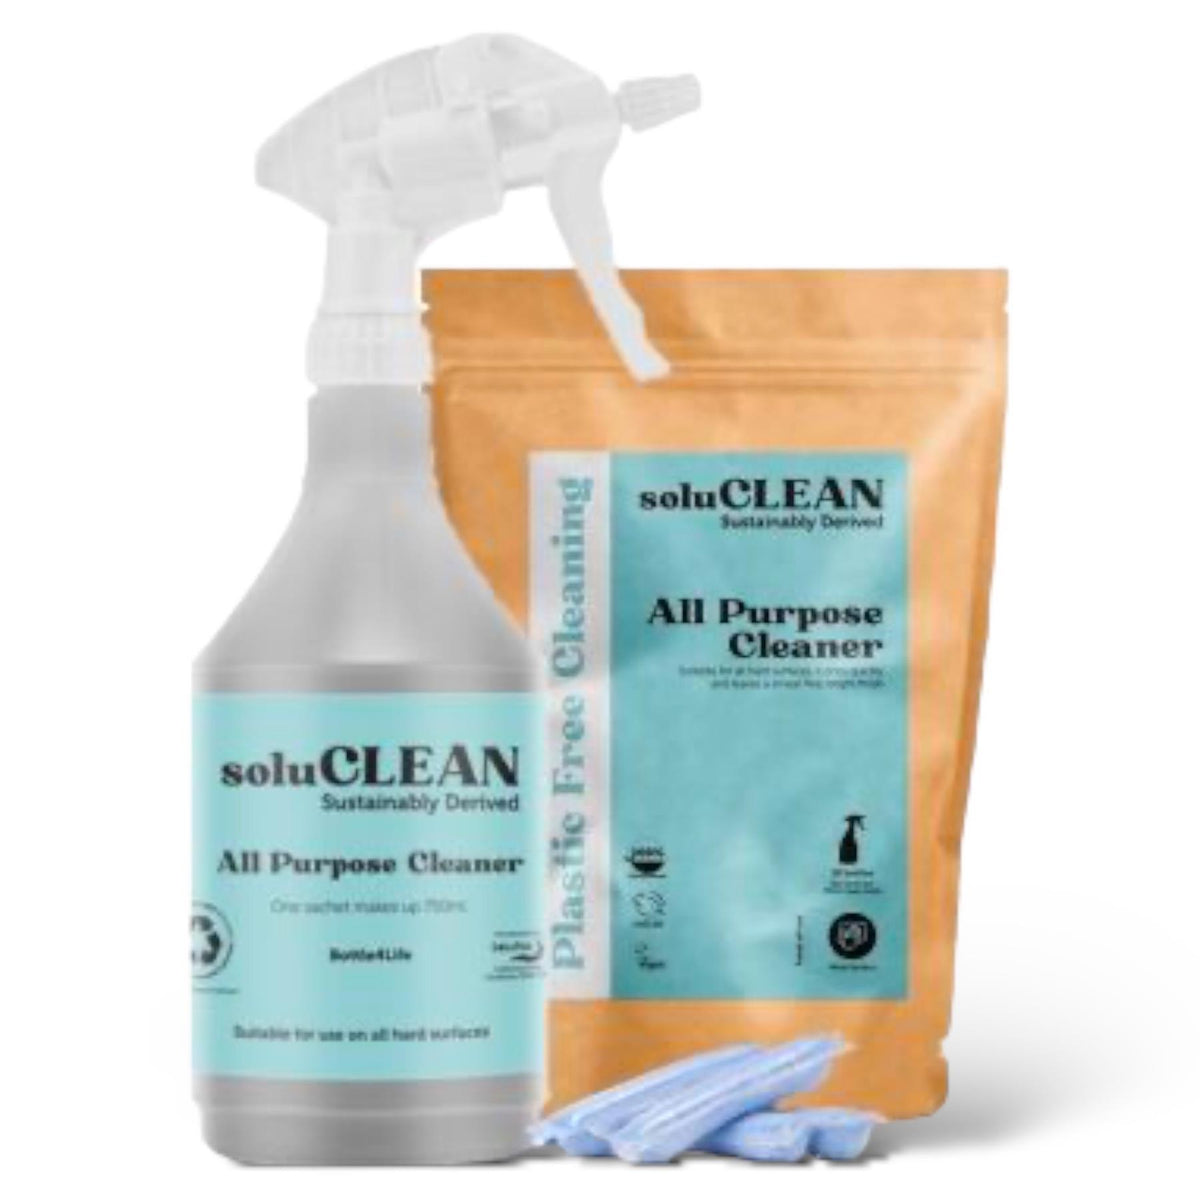 Soluclean, Starter Kit, All Purpose Cleaner, 750ml Reusable Trigger Spray Bottle and One Packet of 10 Sachets, Plastic Free Cleaning